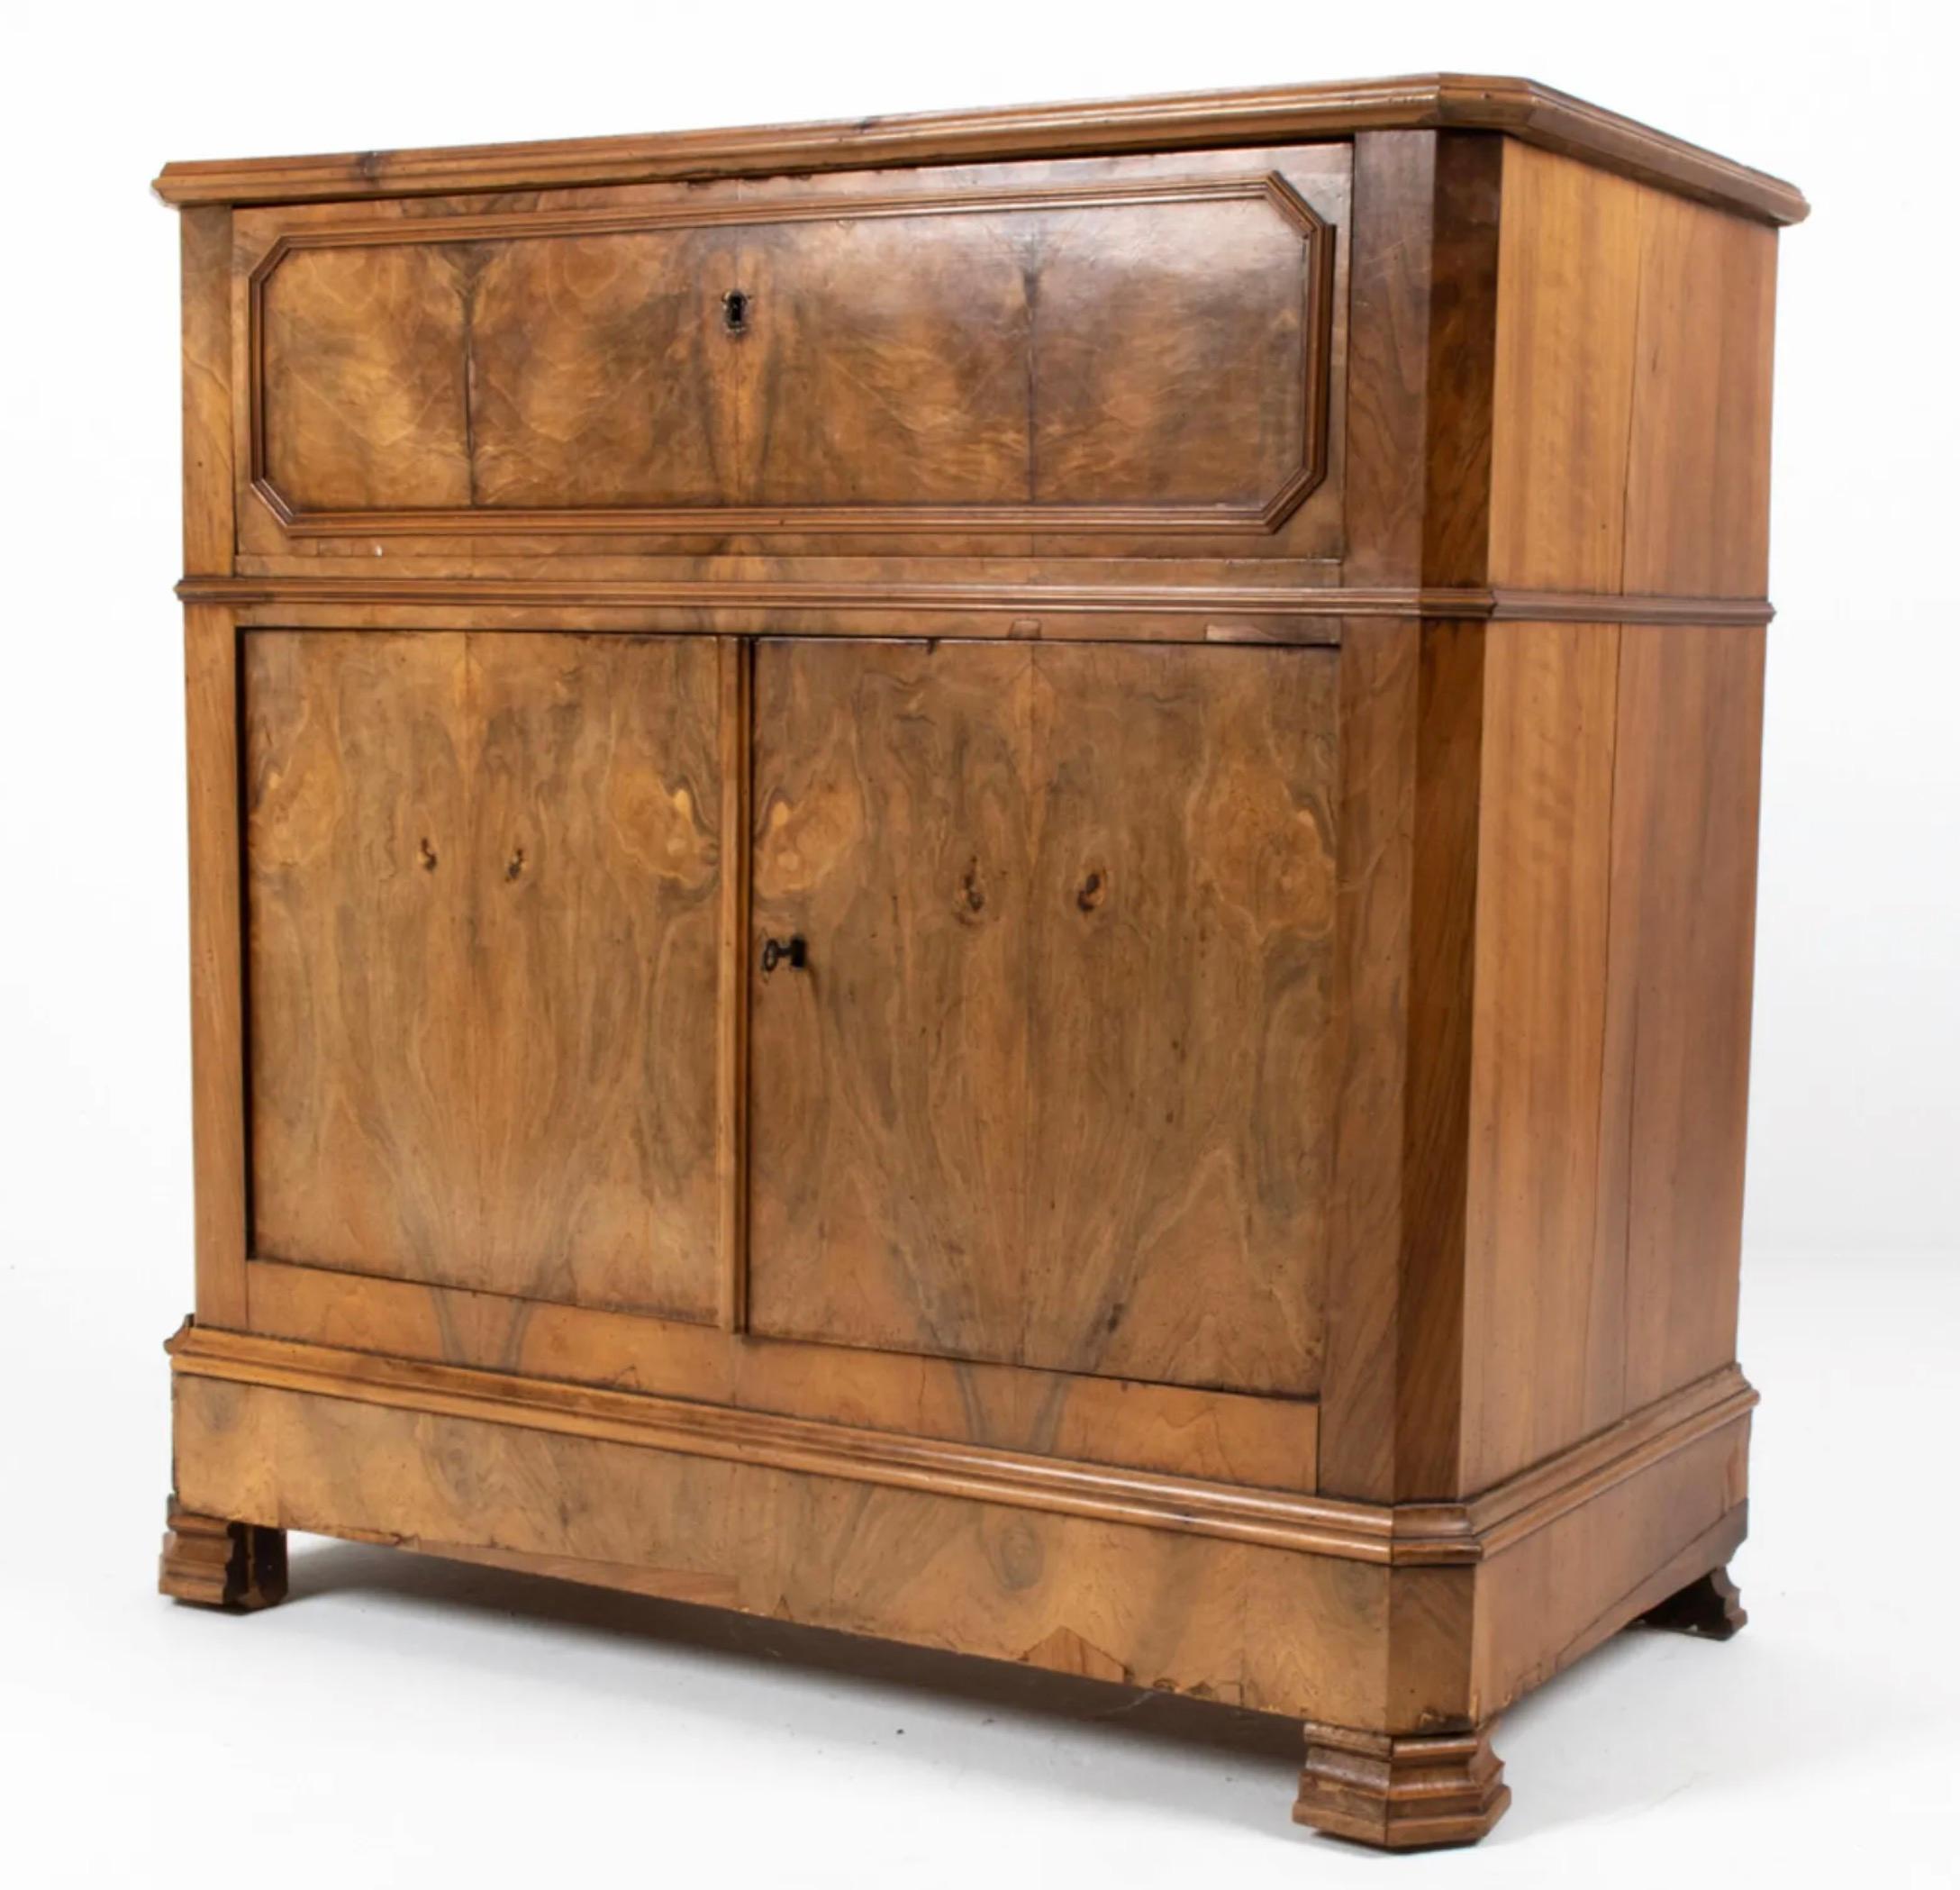 Unusual buffet cabinet with drop-front secretary, which opens to reveal birdseye maple drawer fronts with ebonized trim and an embossed leather writing surface. Dimensions: H 39.5